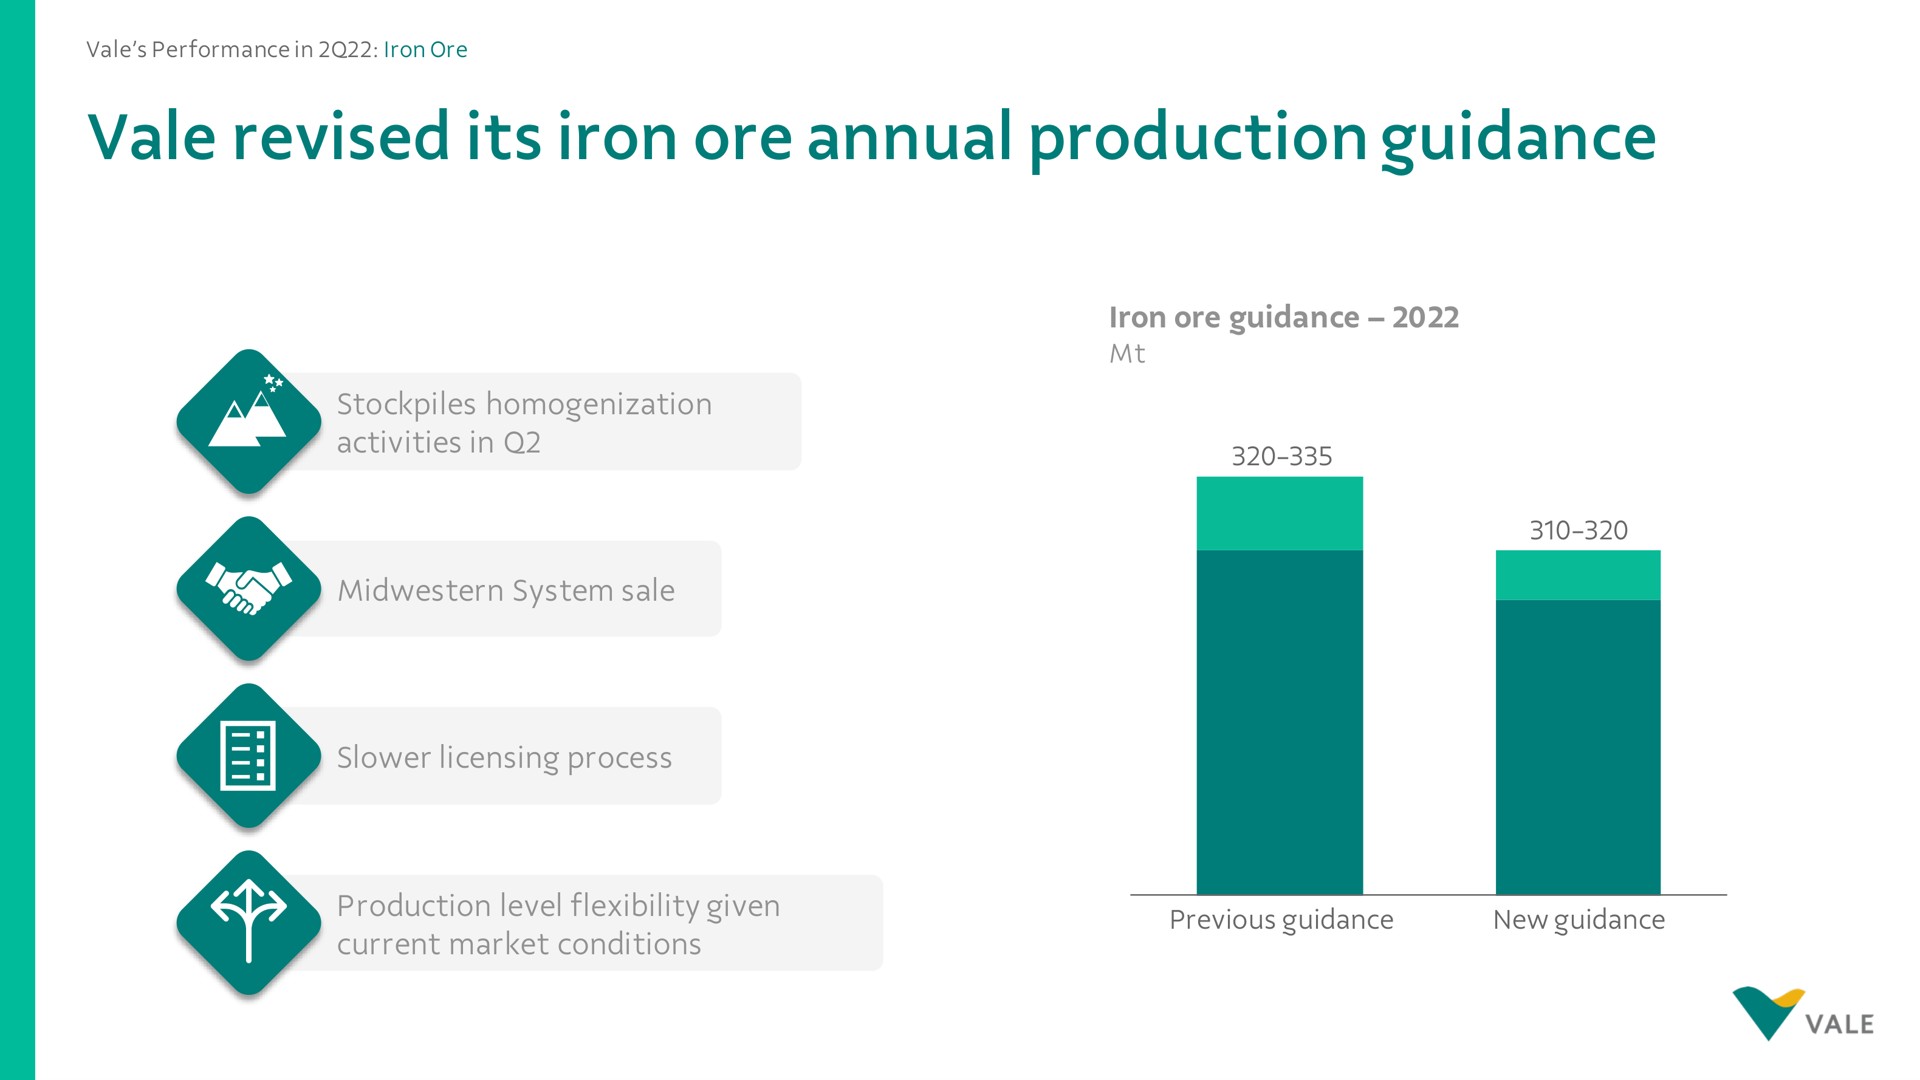 vale revised its iron ore annual production guidance | Vale